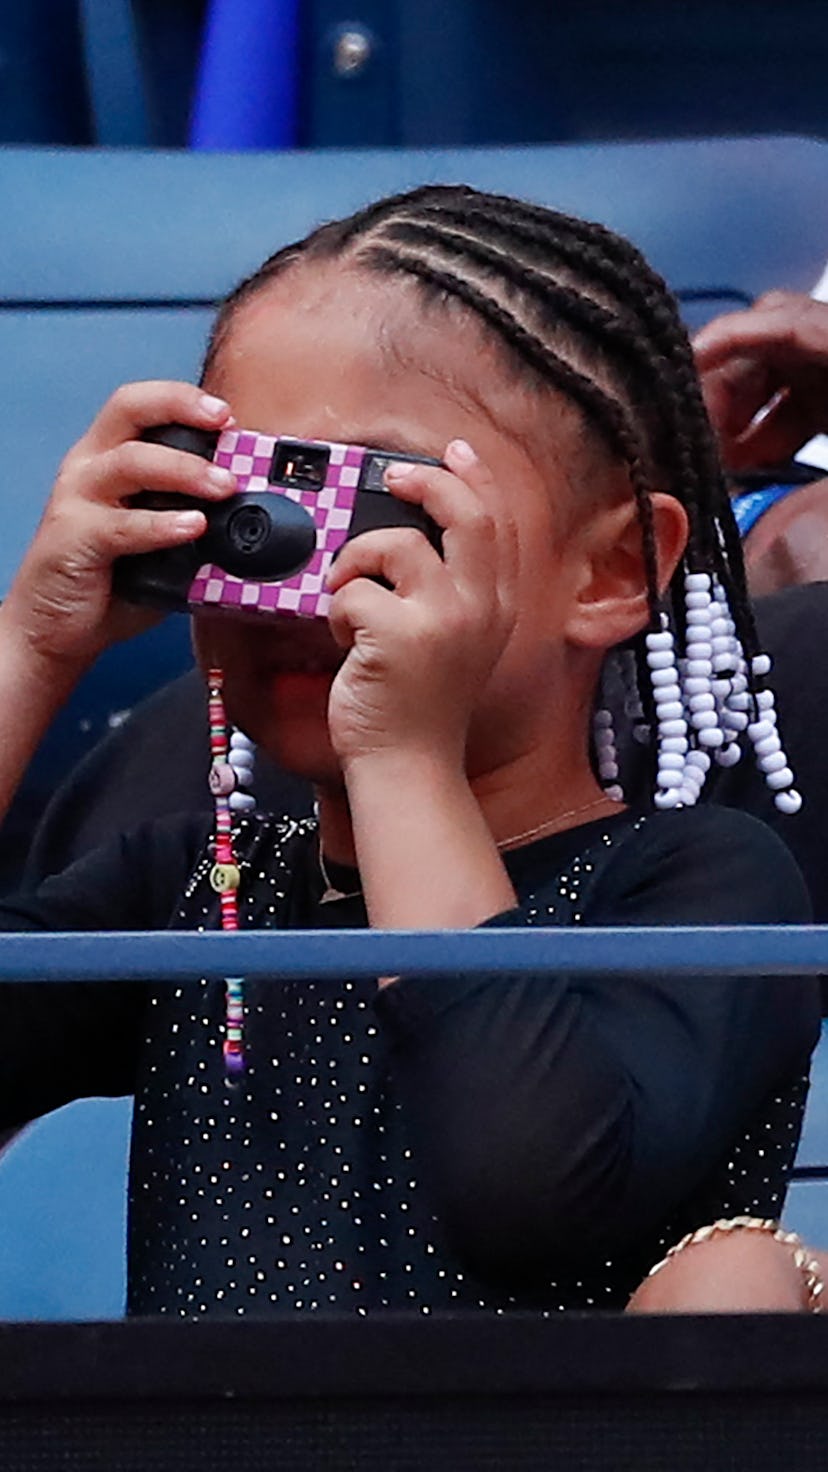 US player Serena Williams' daughter Alexis Olympia takes a picture before her mother plays against M...